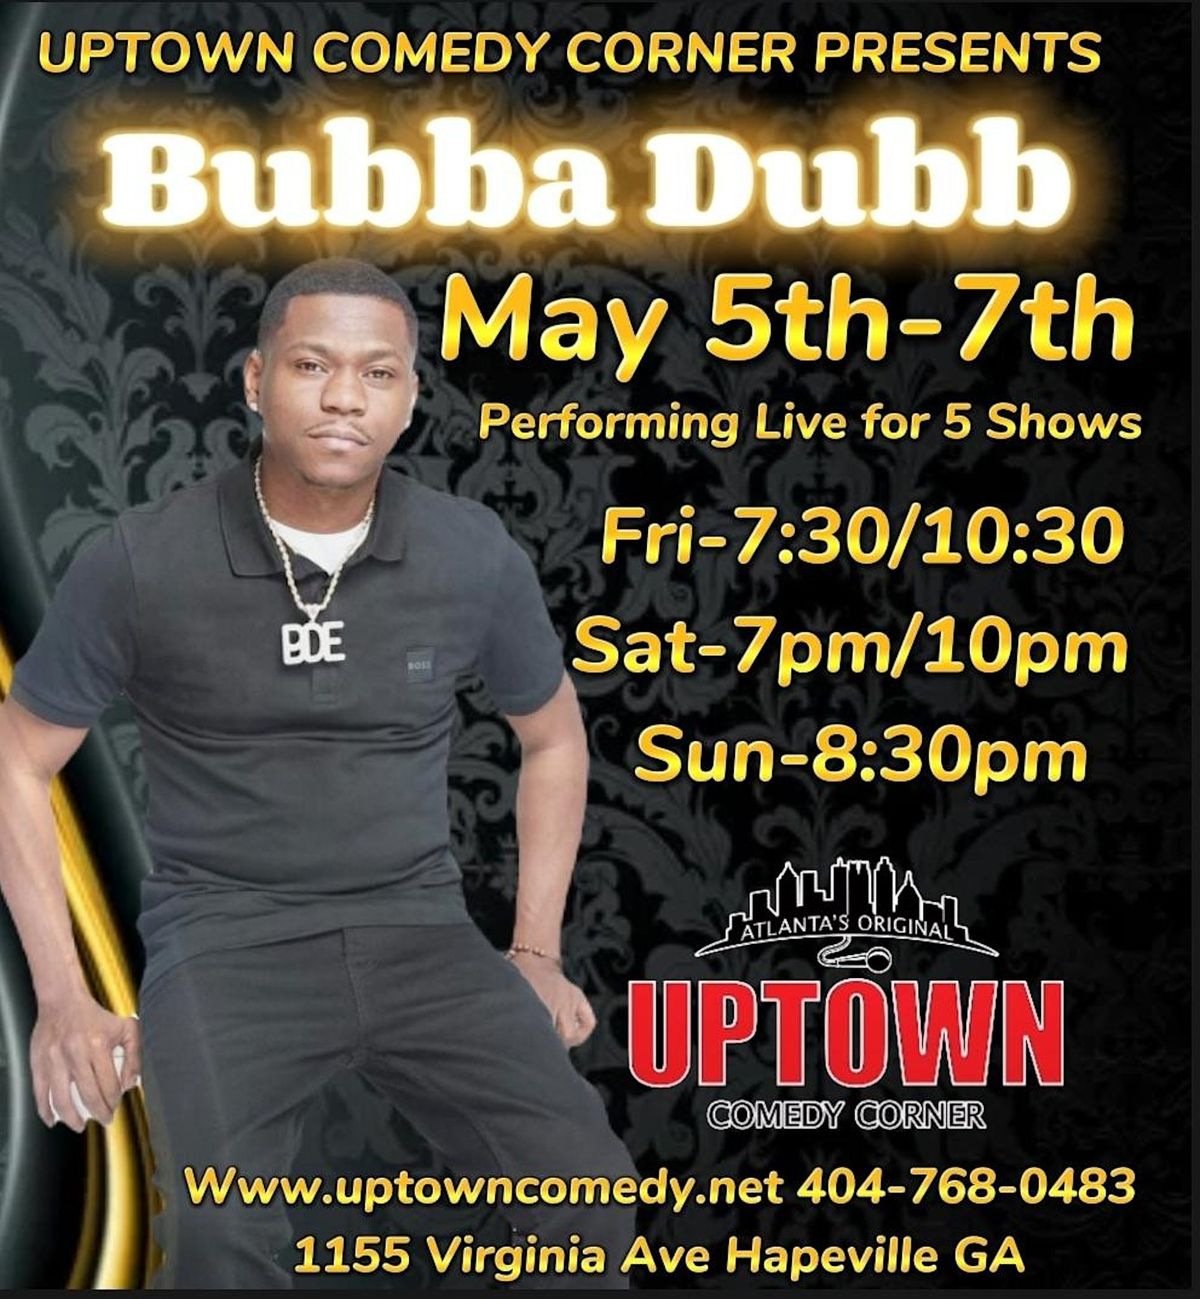 Comedian Bubba Dubb (Traash Talk)Mother's Day Weekend-Special Engagement